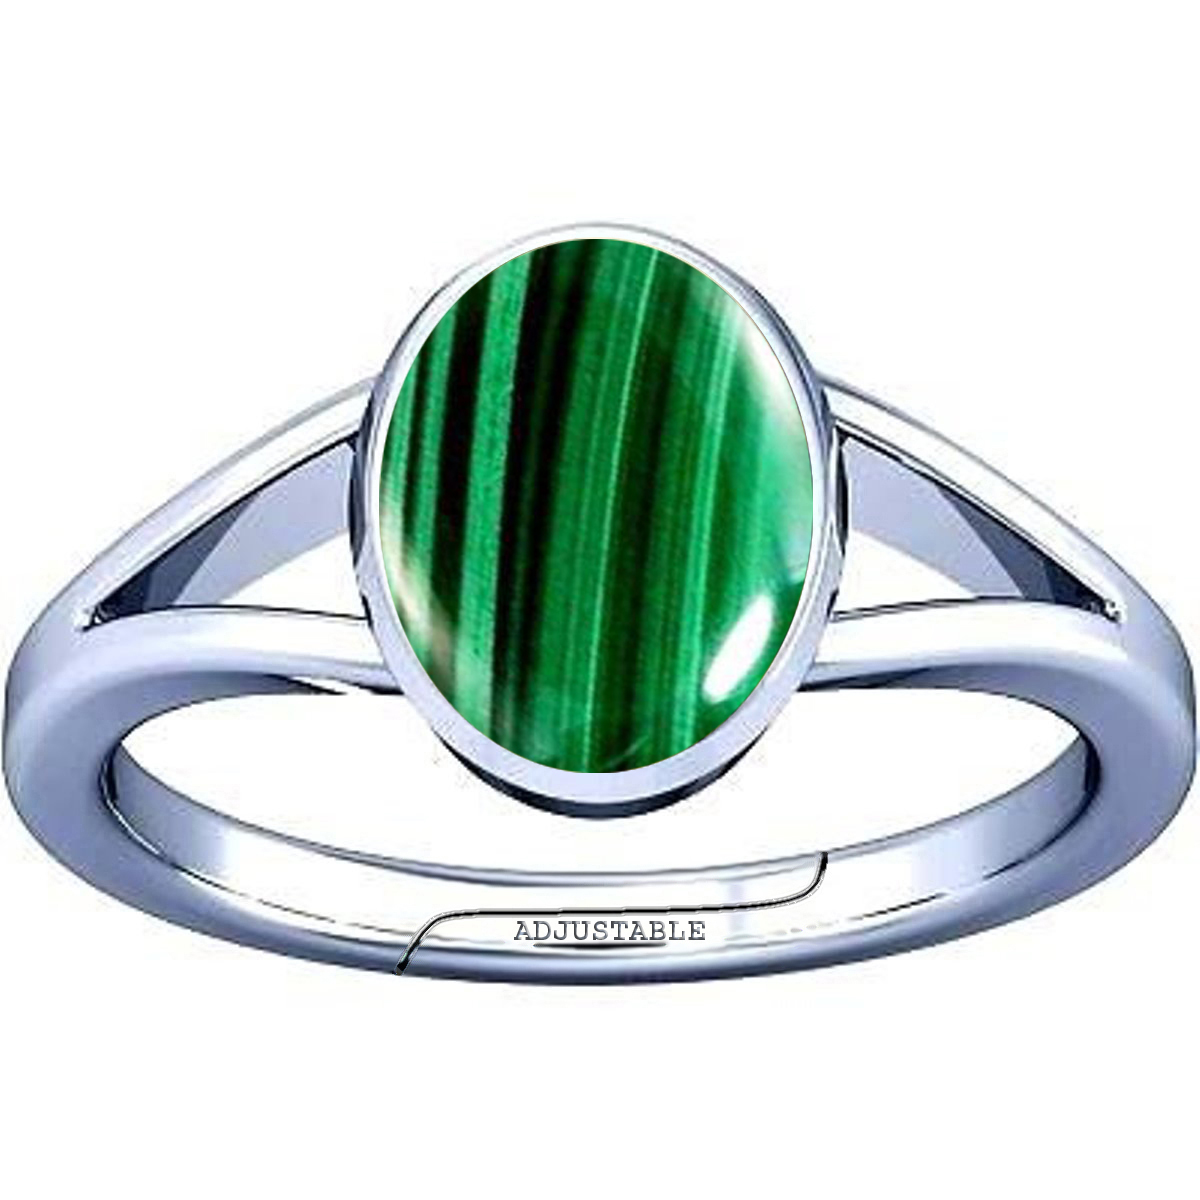 Buy Natural Certified Emerald Panna Gemstone Astrological Ring 925 Strling  Silver Handmade Ring for Men and Woman Online in India - Etsy